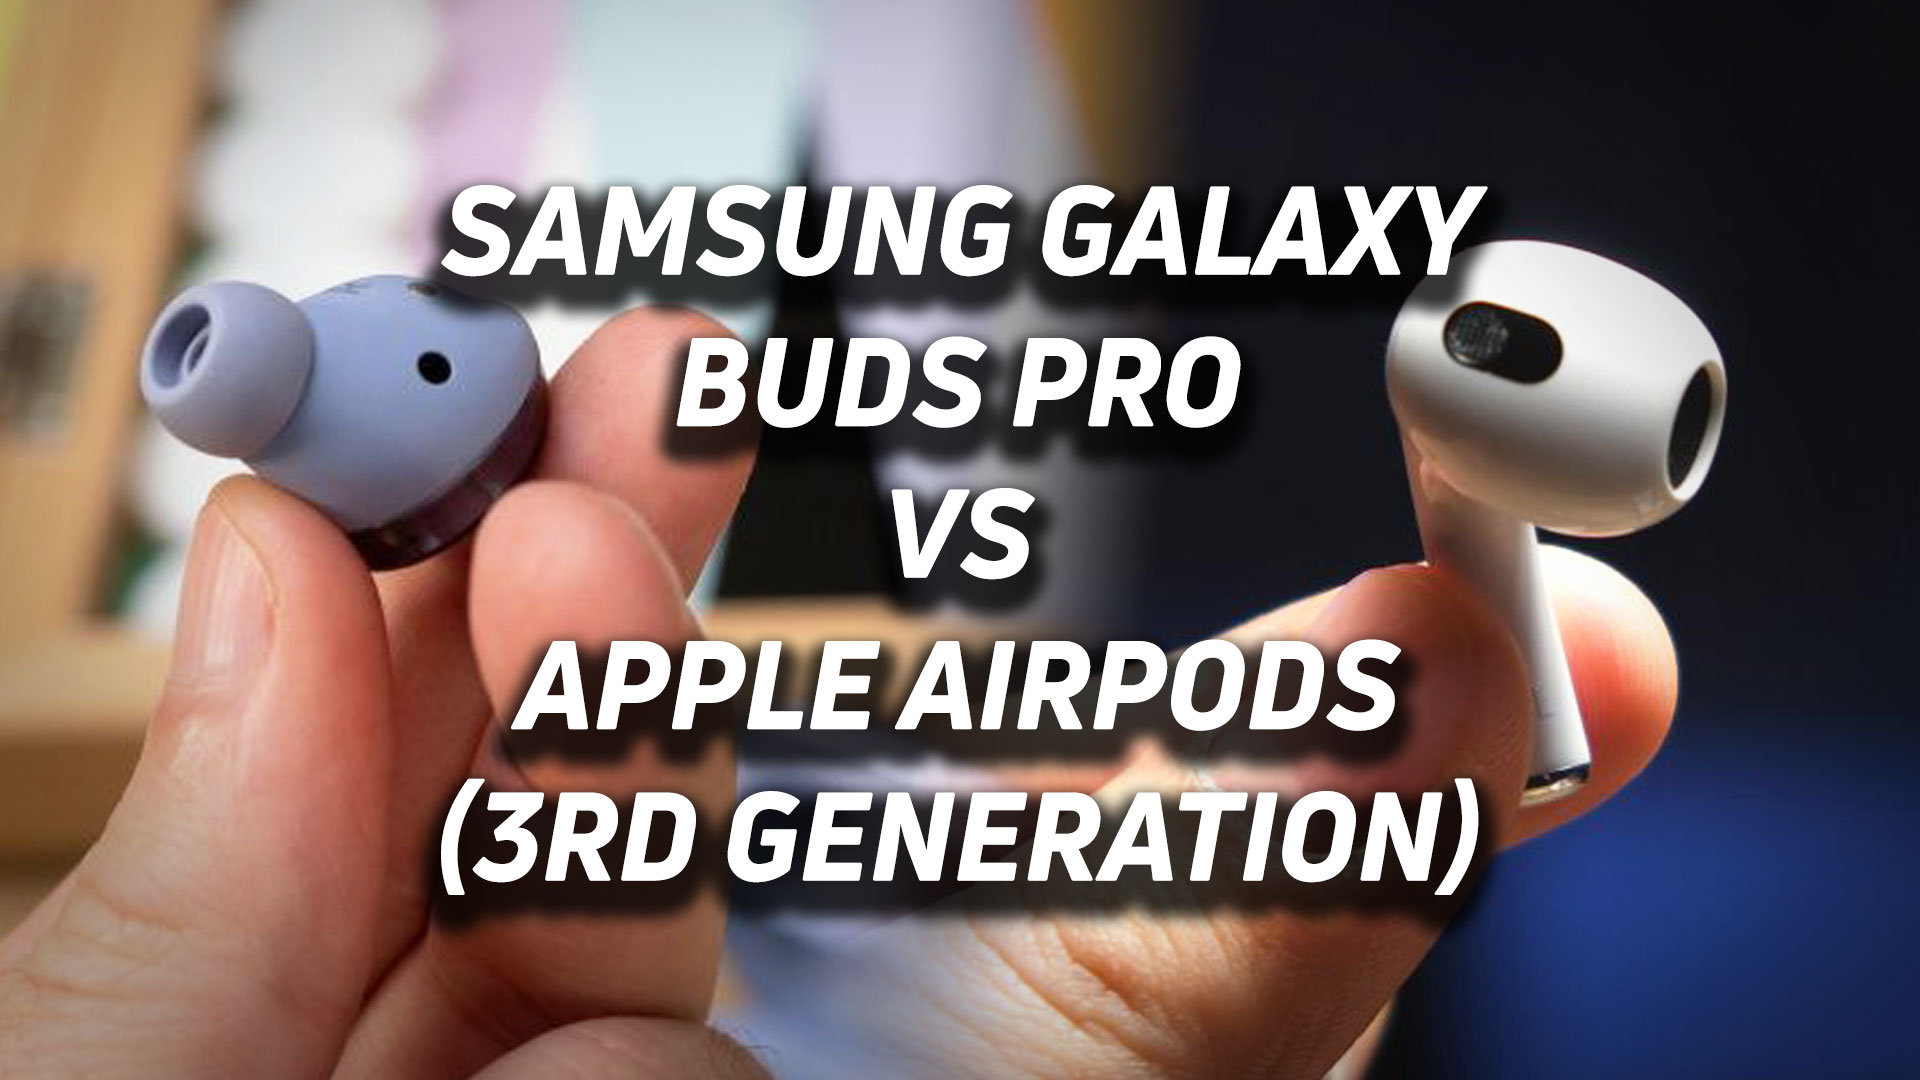 A blended image of the Samsung Galaxy Buds Pro in lavender and the white Apple AirPods (3rd generation).